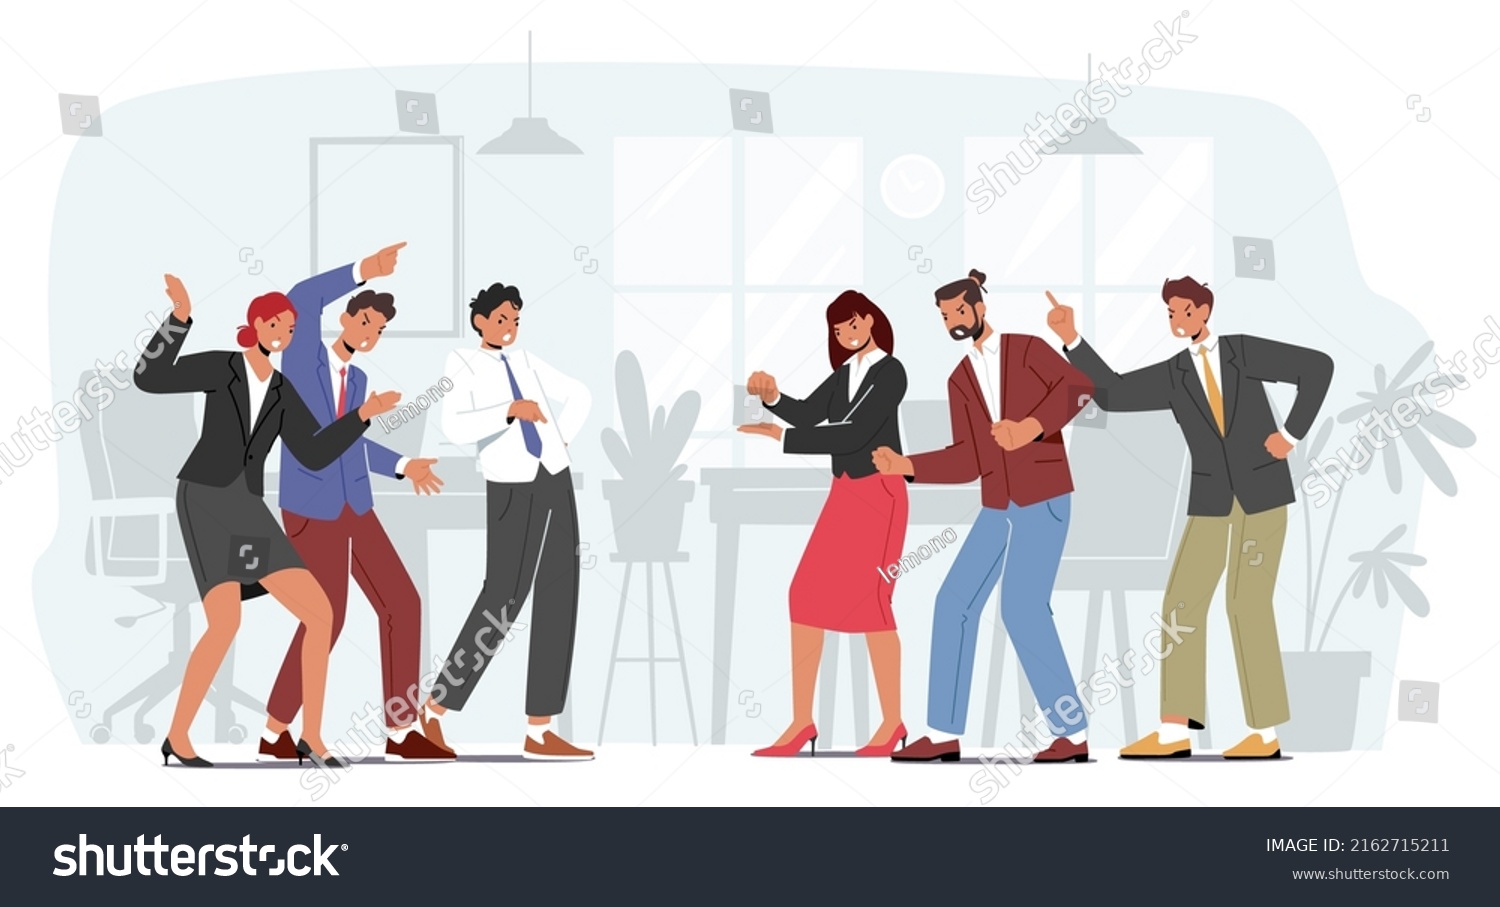 SVG of Angry Business Team Conflict, Furious Men and Women Quarrel and Fight, Characters Arguing in Office. Competition, Fighting for Leadership, Disagreement and Staring. Cartoon People Vector Illustration svg